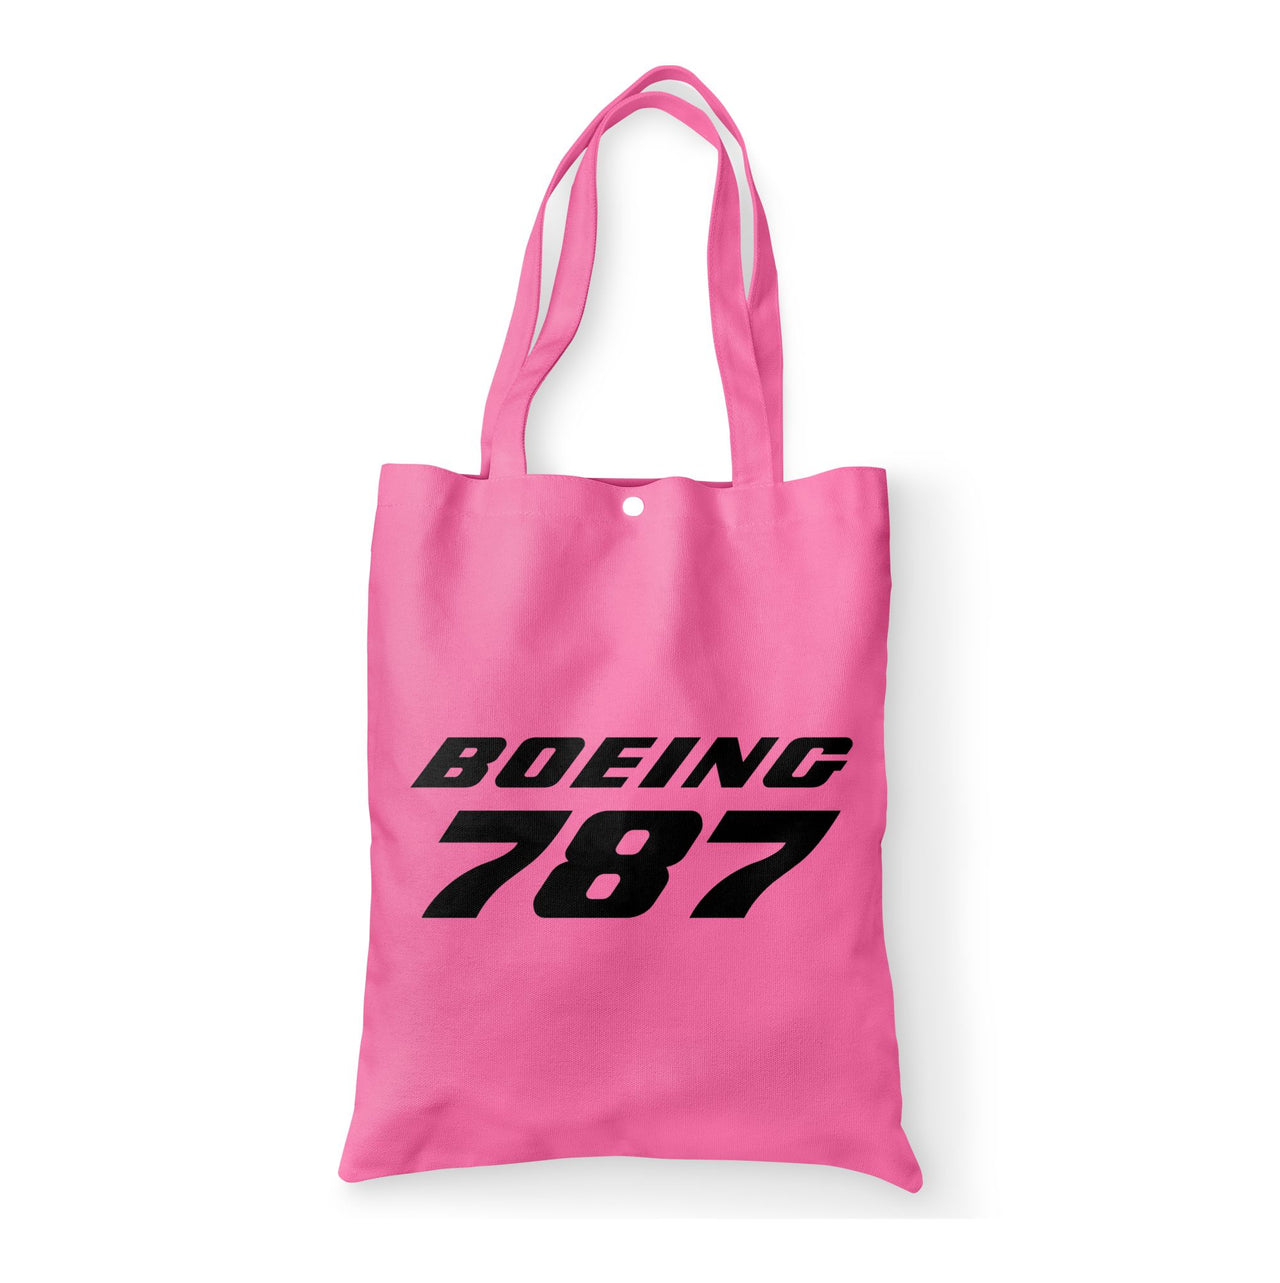 Boeing 787 & Text Designed Tote Bags